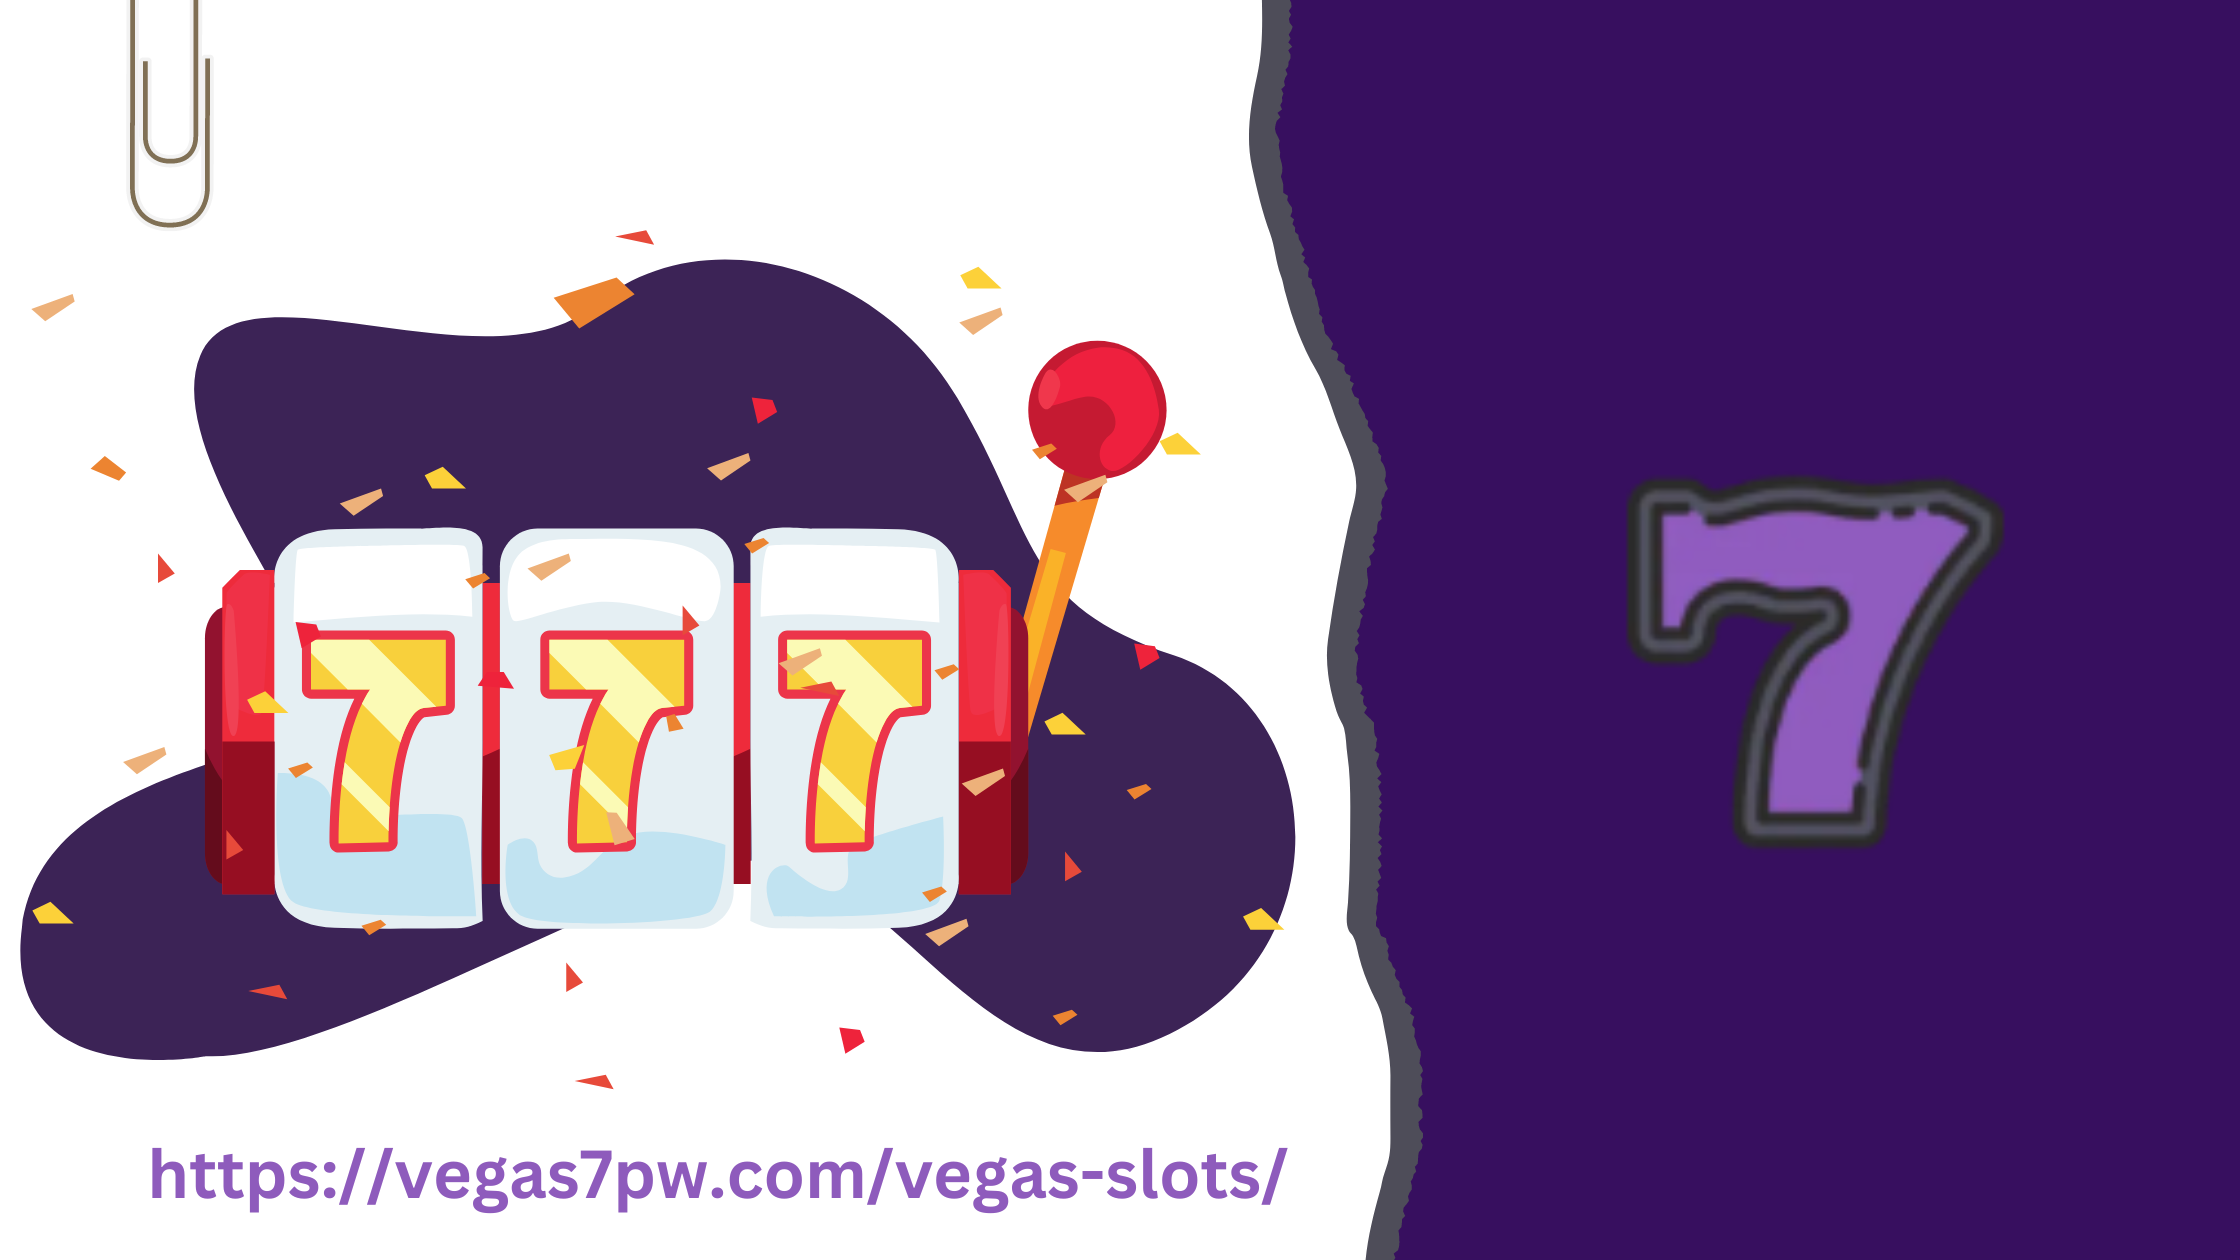 Vegas Slots vs. Online Slots: Which Offers Better Odds?